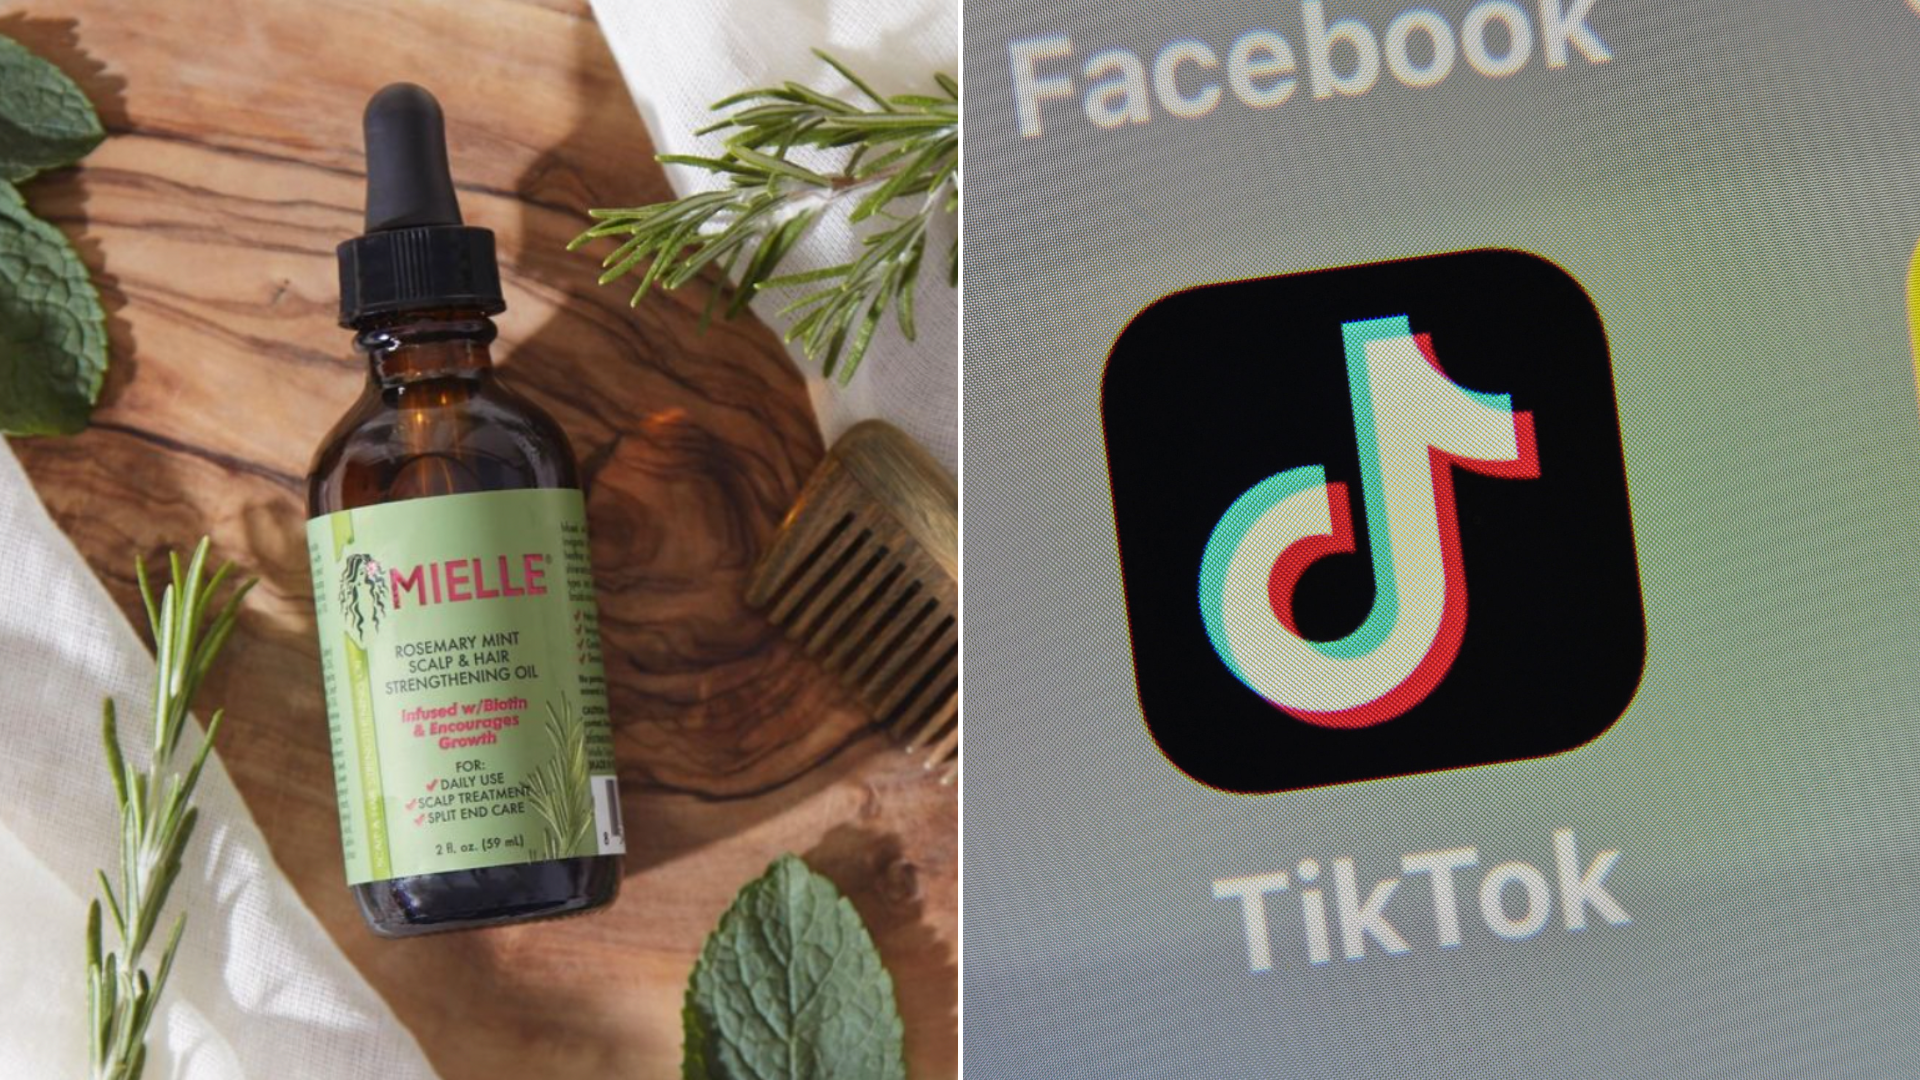 My Honest Review: Mielle's Rosemary Mint Hair Growth Oil